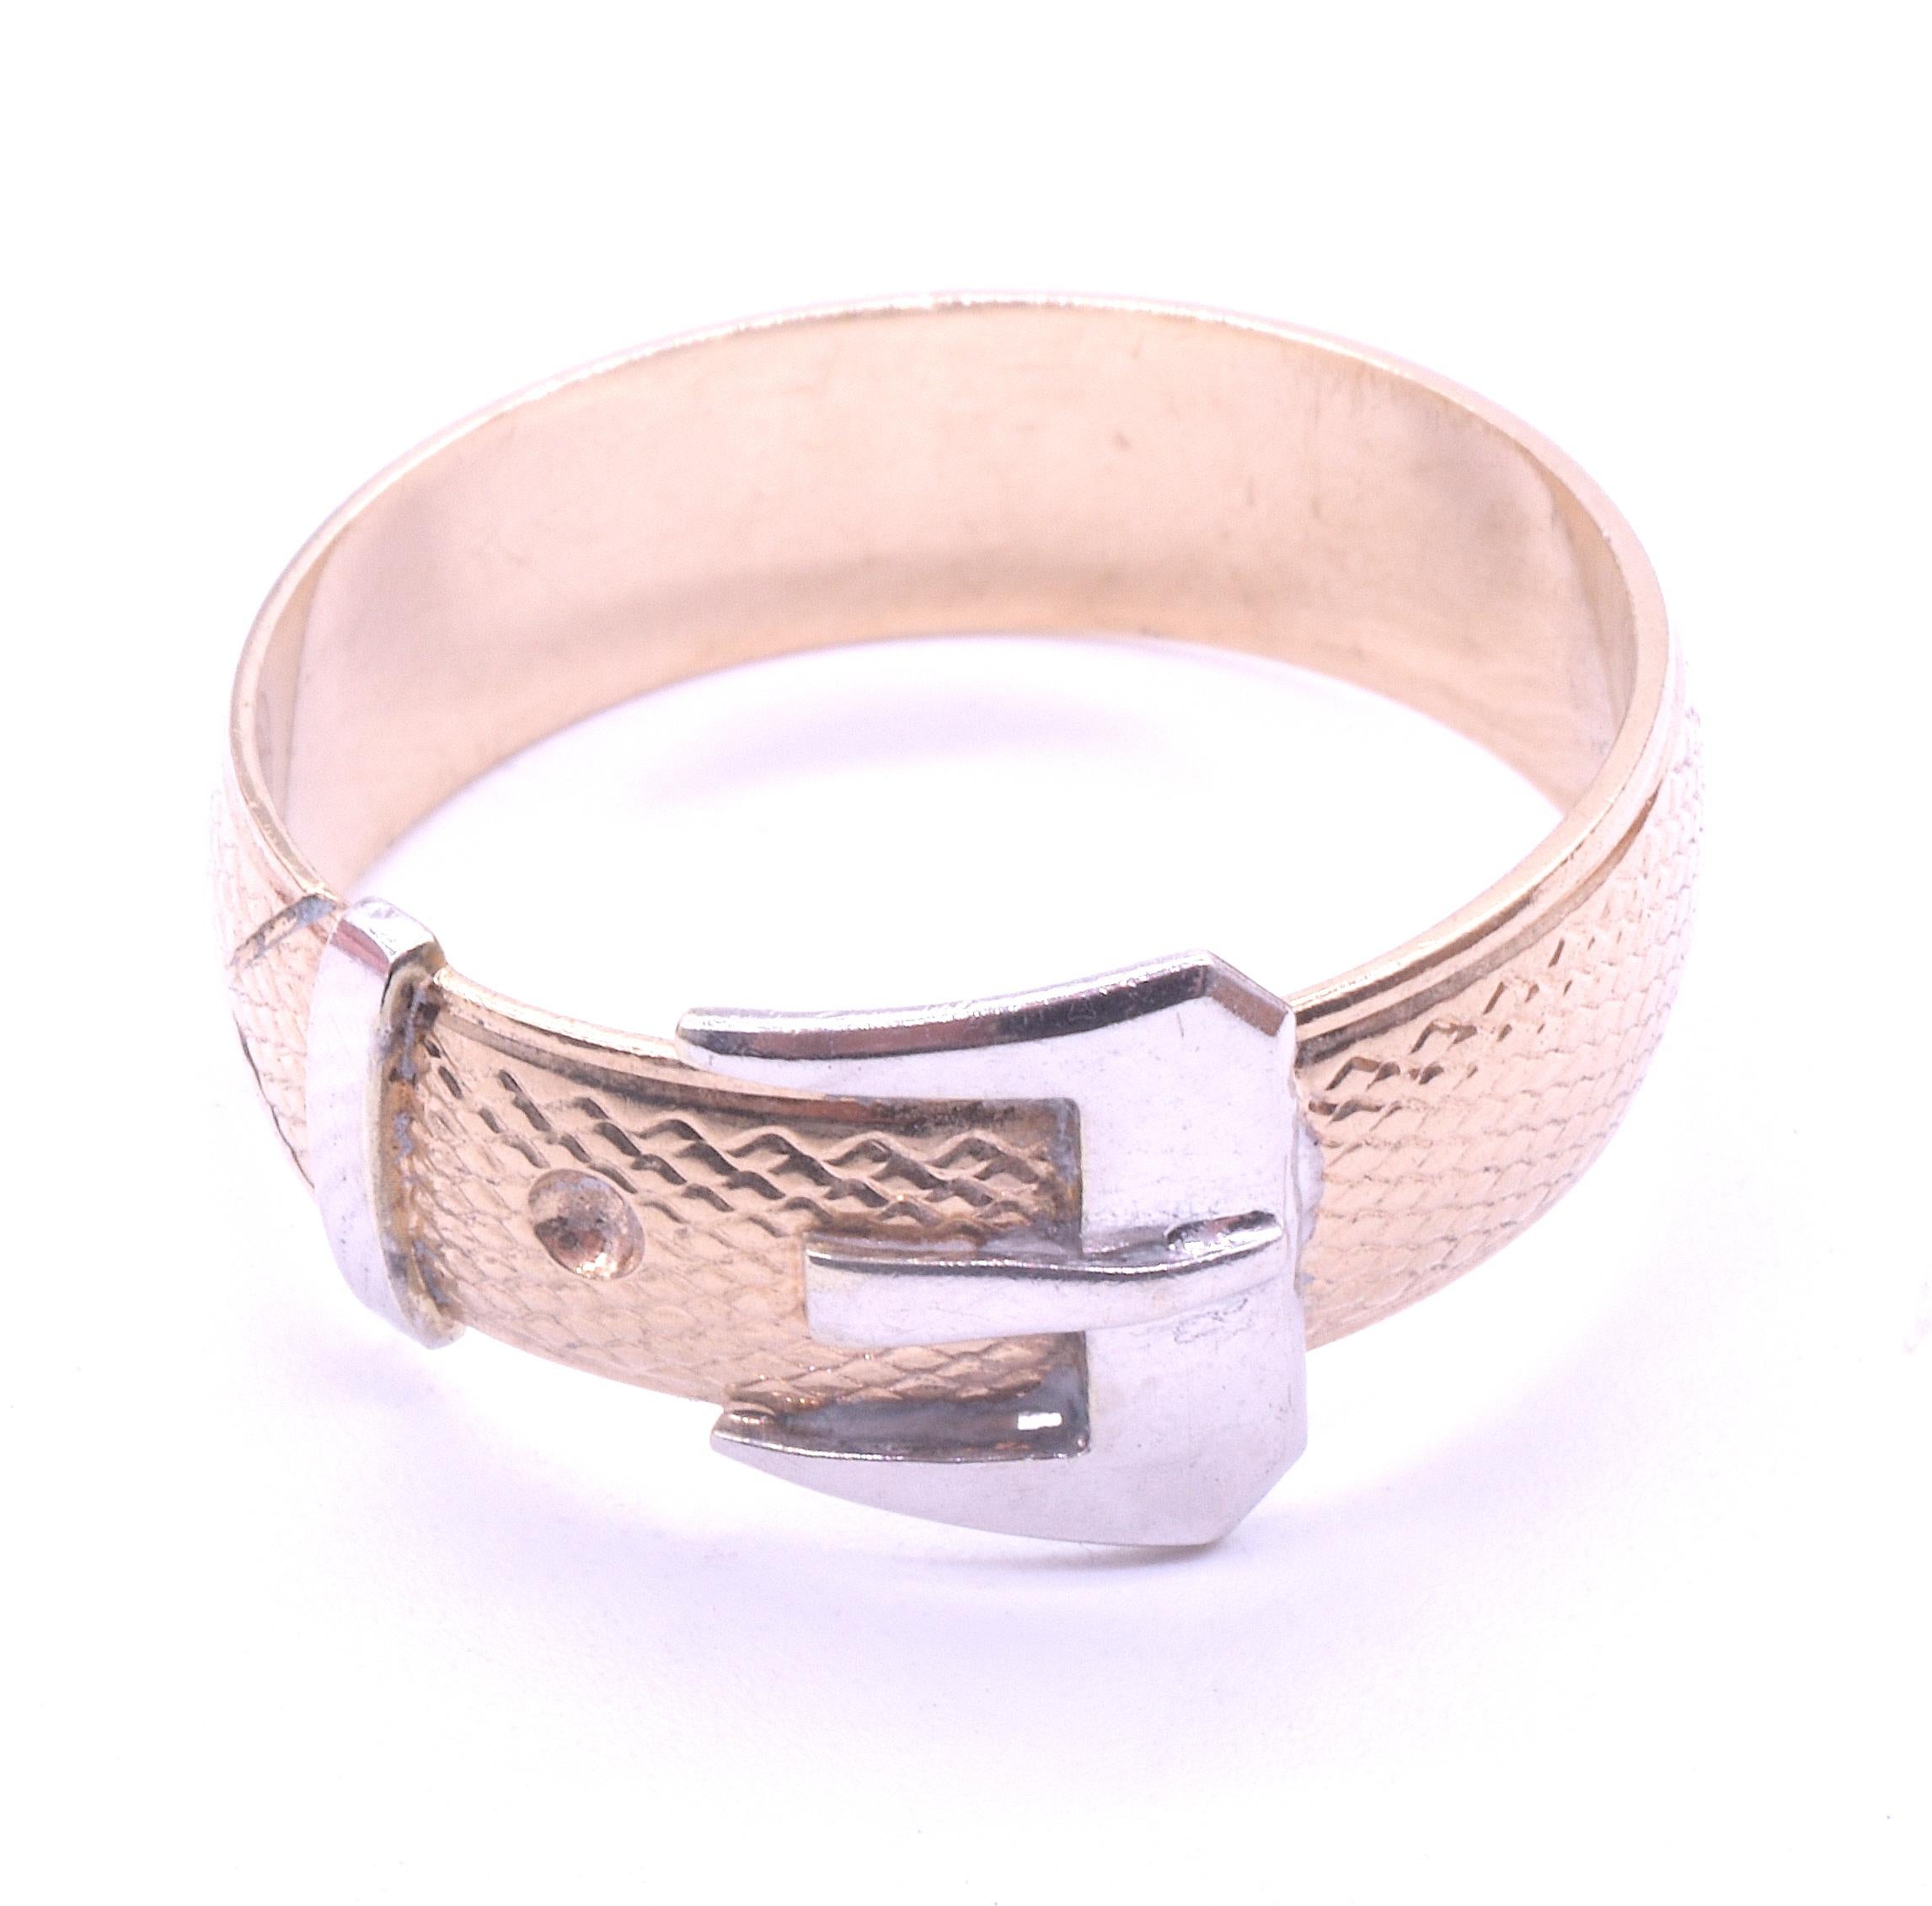 Large Victorian buckle ring in 9K but with a sterling silver buckle c1890.   The contrast of the two metals is sophisticated and smart looking. The interesting texture of the gold band has the look of shagreen, an interesting detail (the Victorians